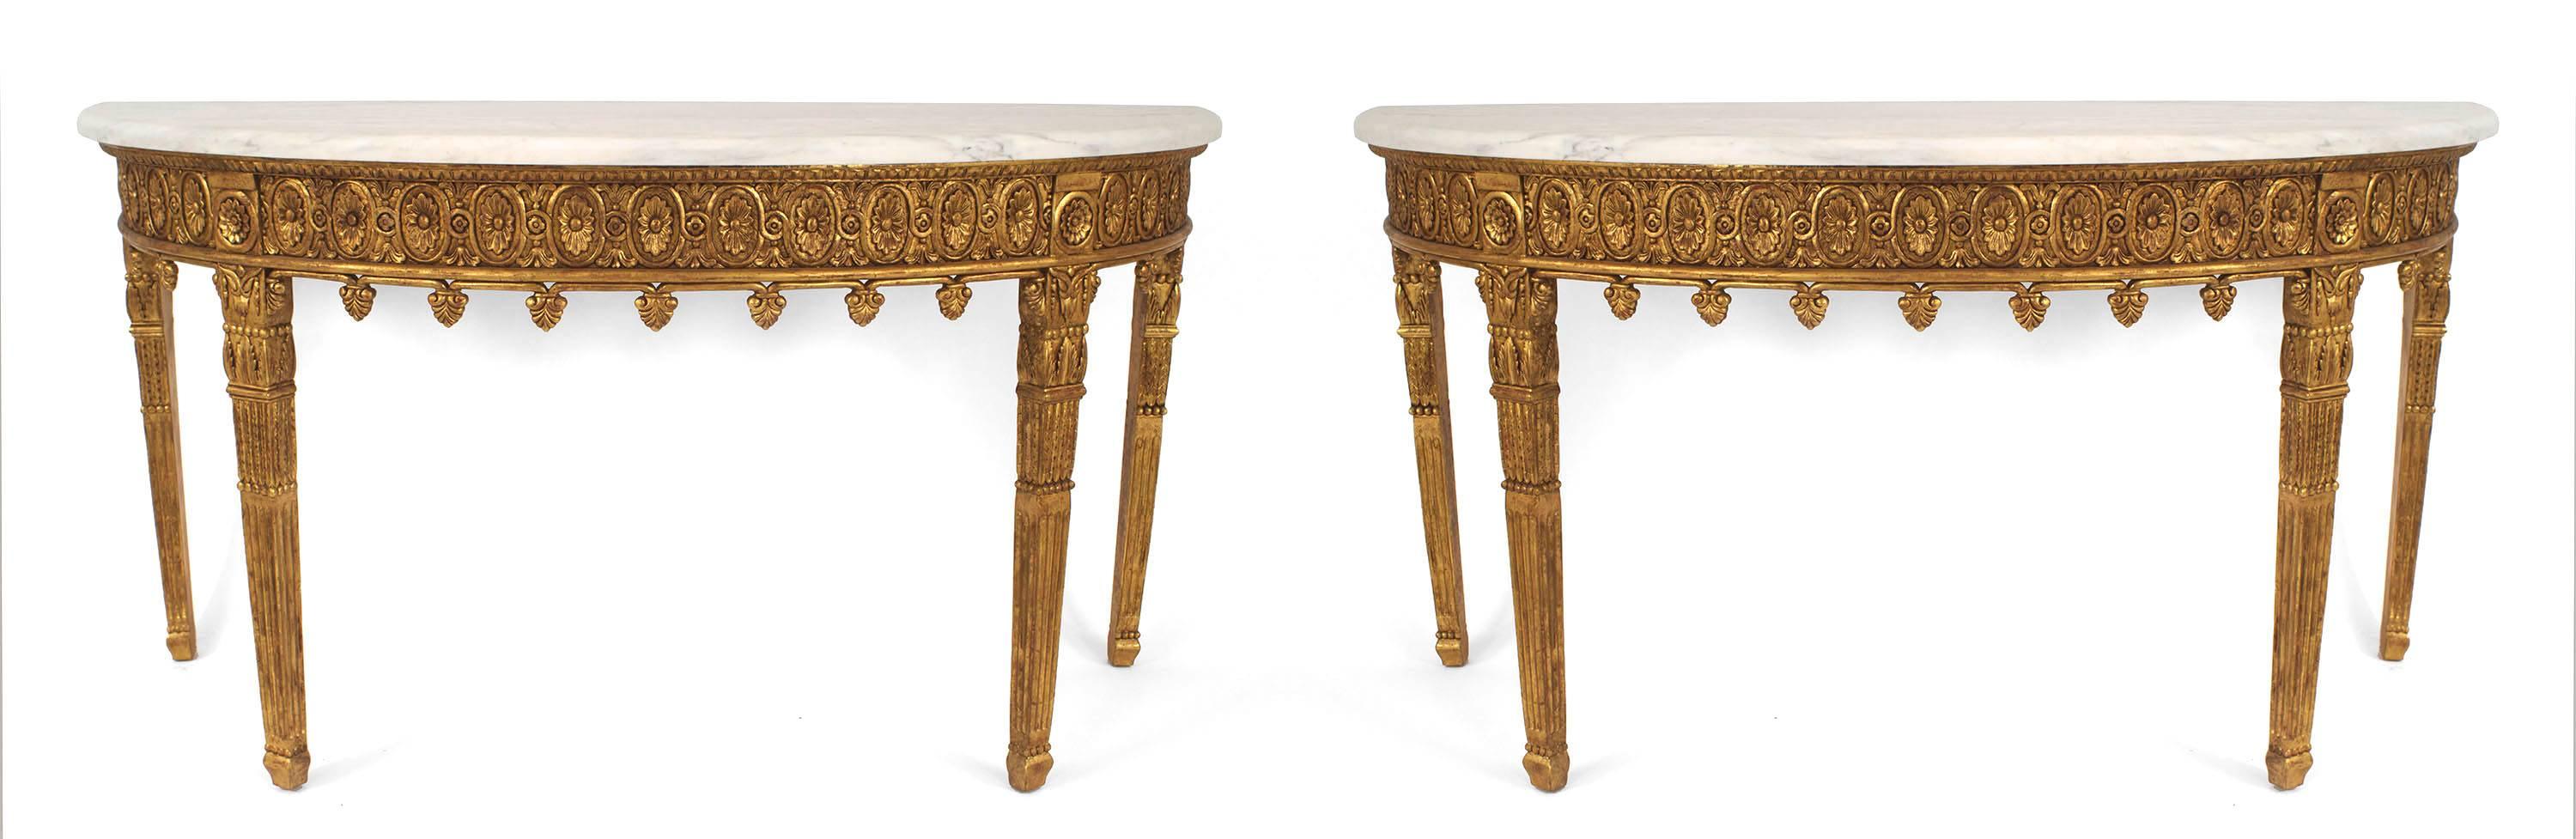 Pair of English Adam-style (20th Century) gilt carved demilune shaped console tables with finials on apron and fluted rectangular legs. (PRICED AS Pair).
 